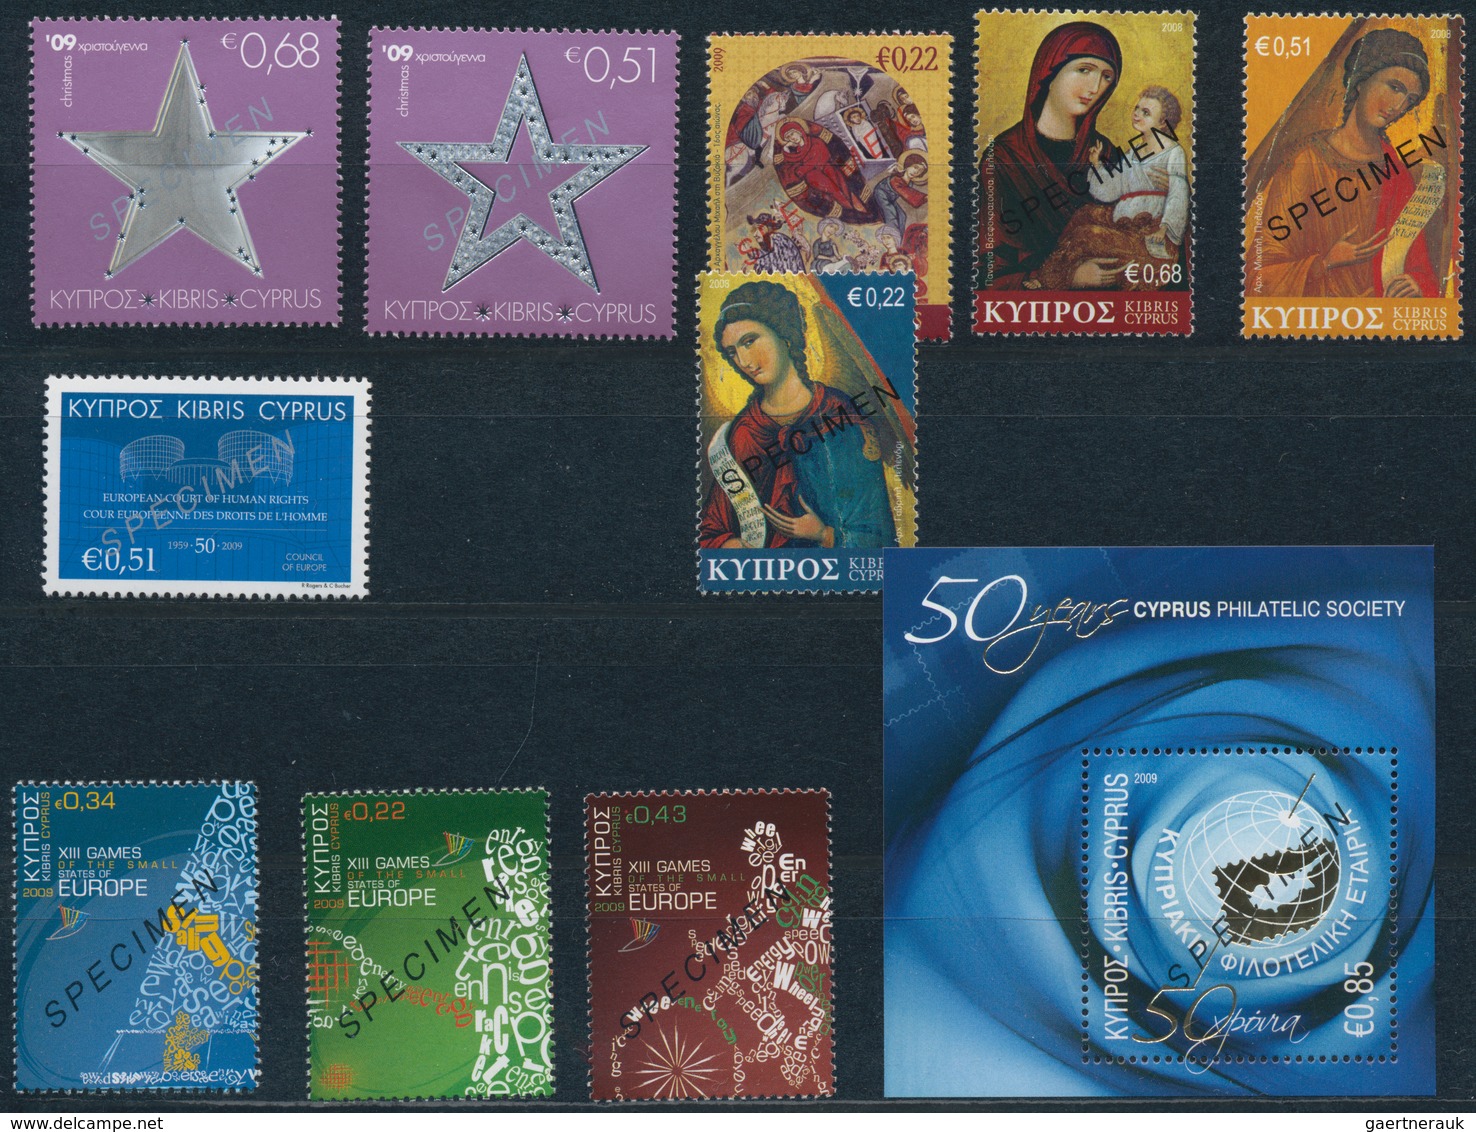 Ungarn: 1992/2010, set of more than 160 Specimen stamps and 20 souvenir and minature sheets with spe